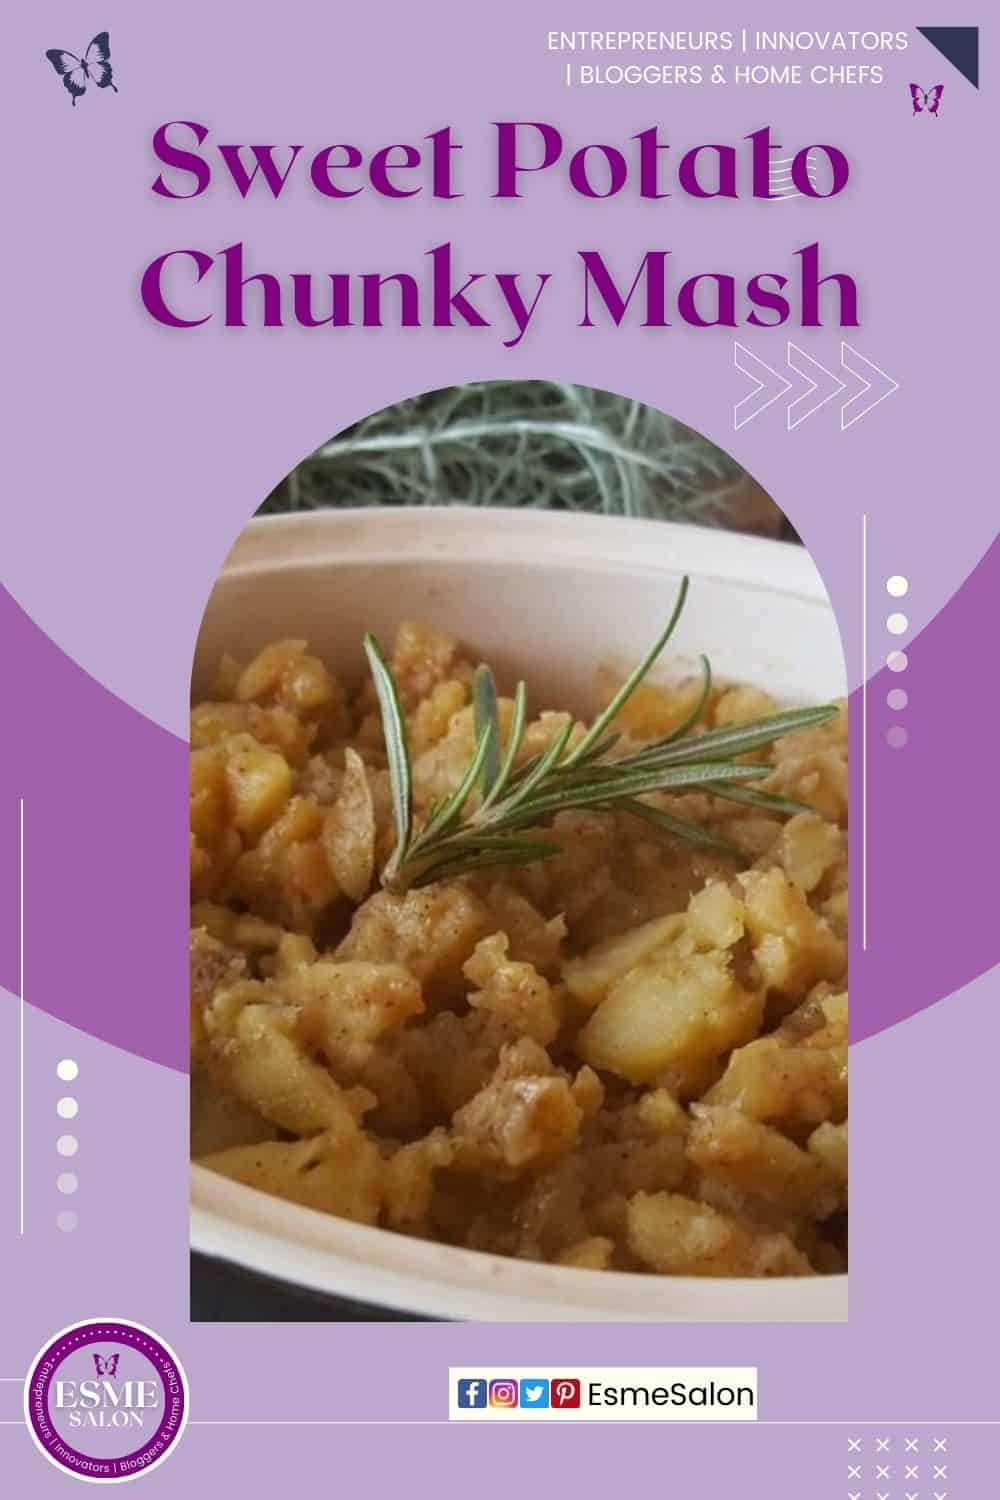 an image of a bowl of Sweet Potato Chunky Mash with thyme